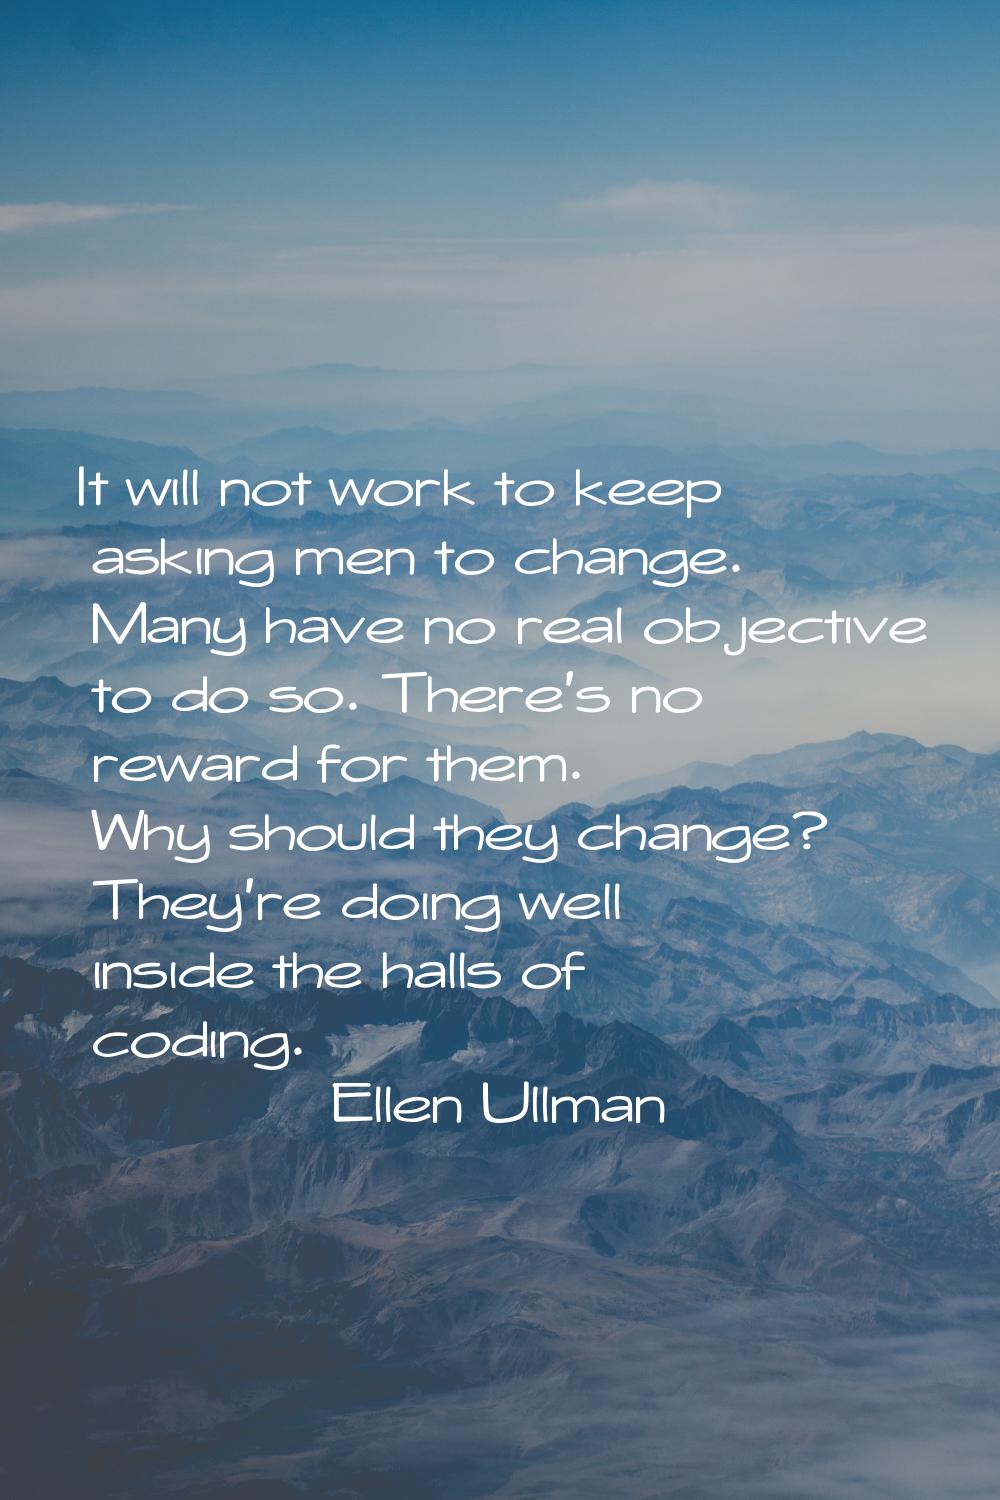 It will not work to keep asking men to change. Many have no real objective to do so. There's no rew